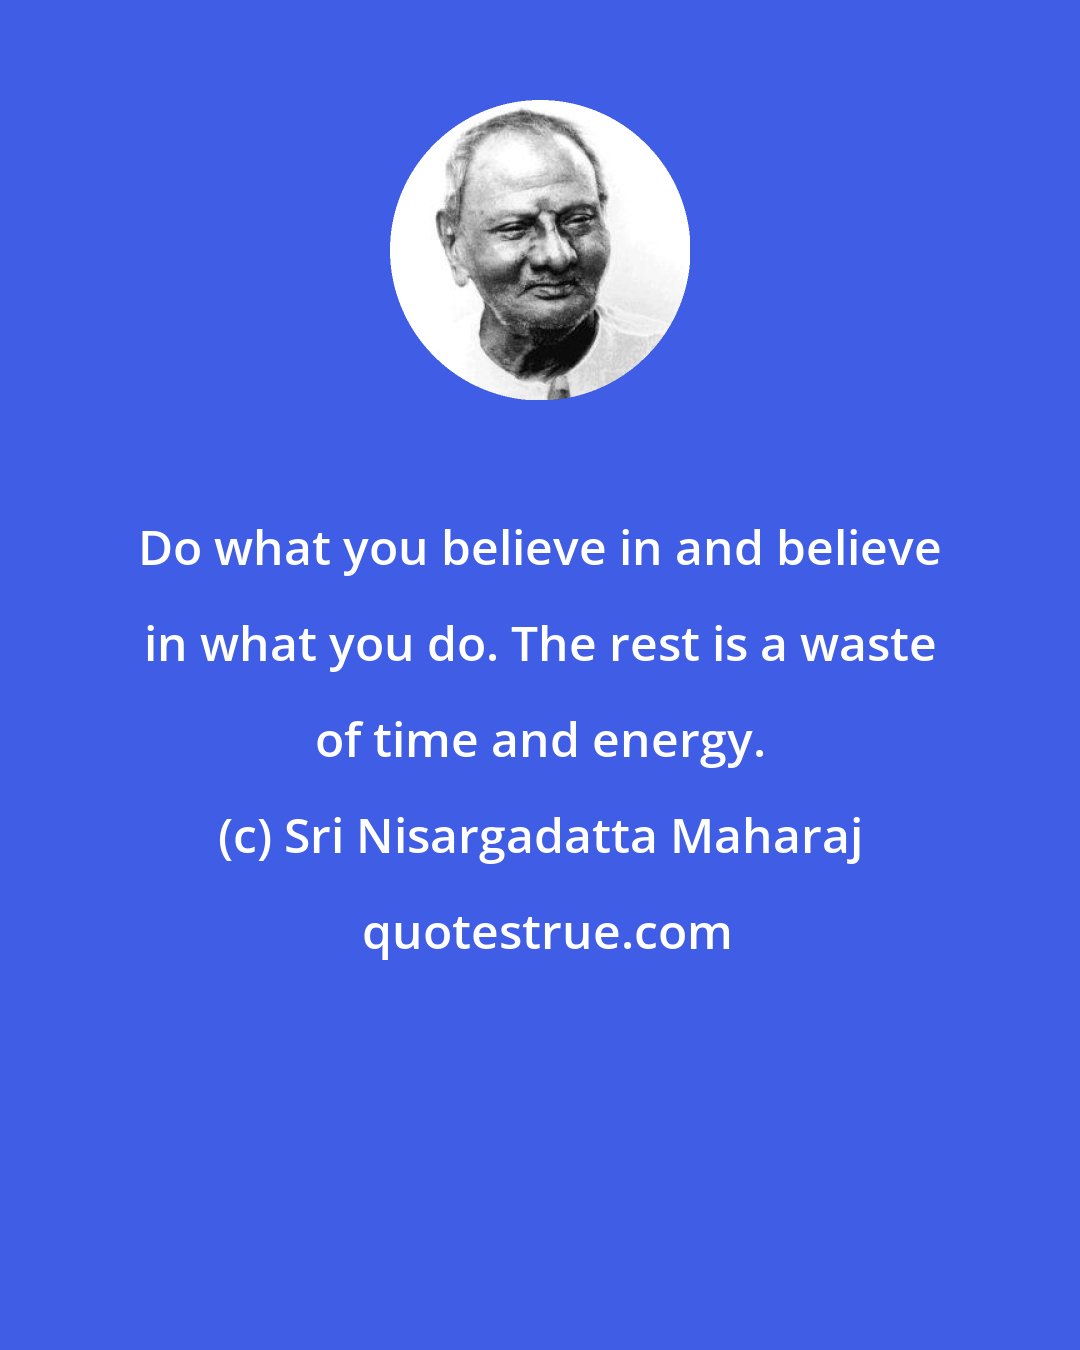 Sri Nisargadatta Maharaj: Do what you believe in and believe in what you do. The rest is a waste of time and energy.